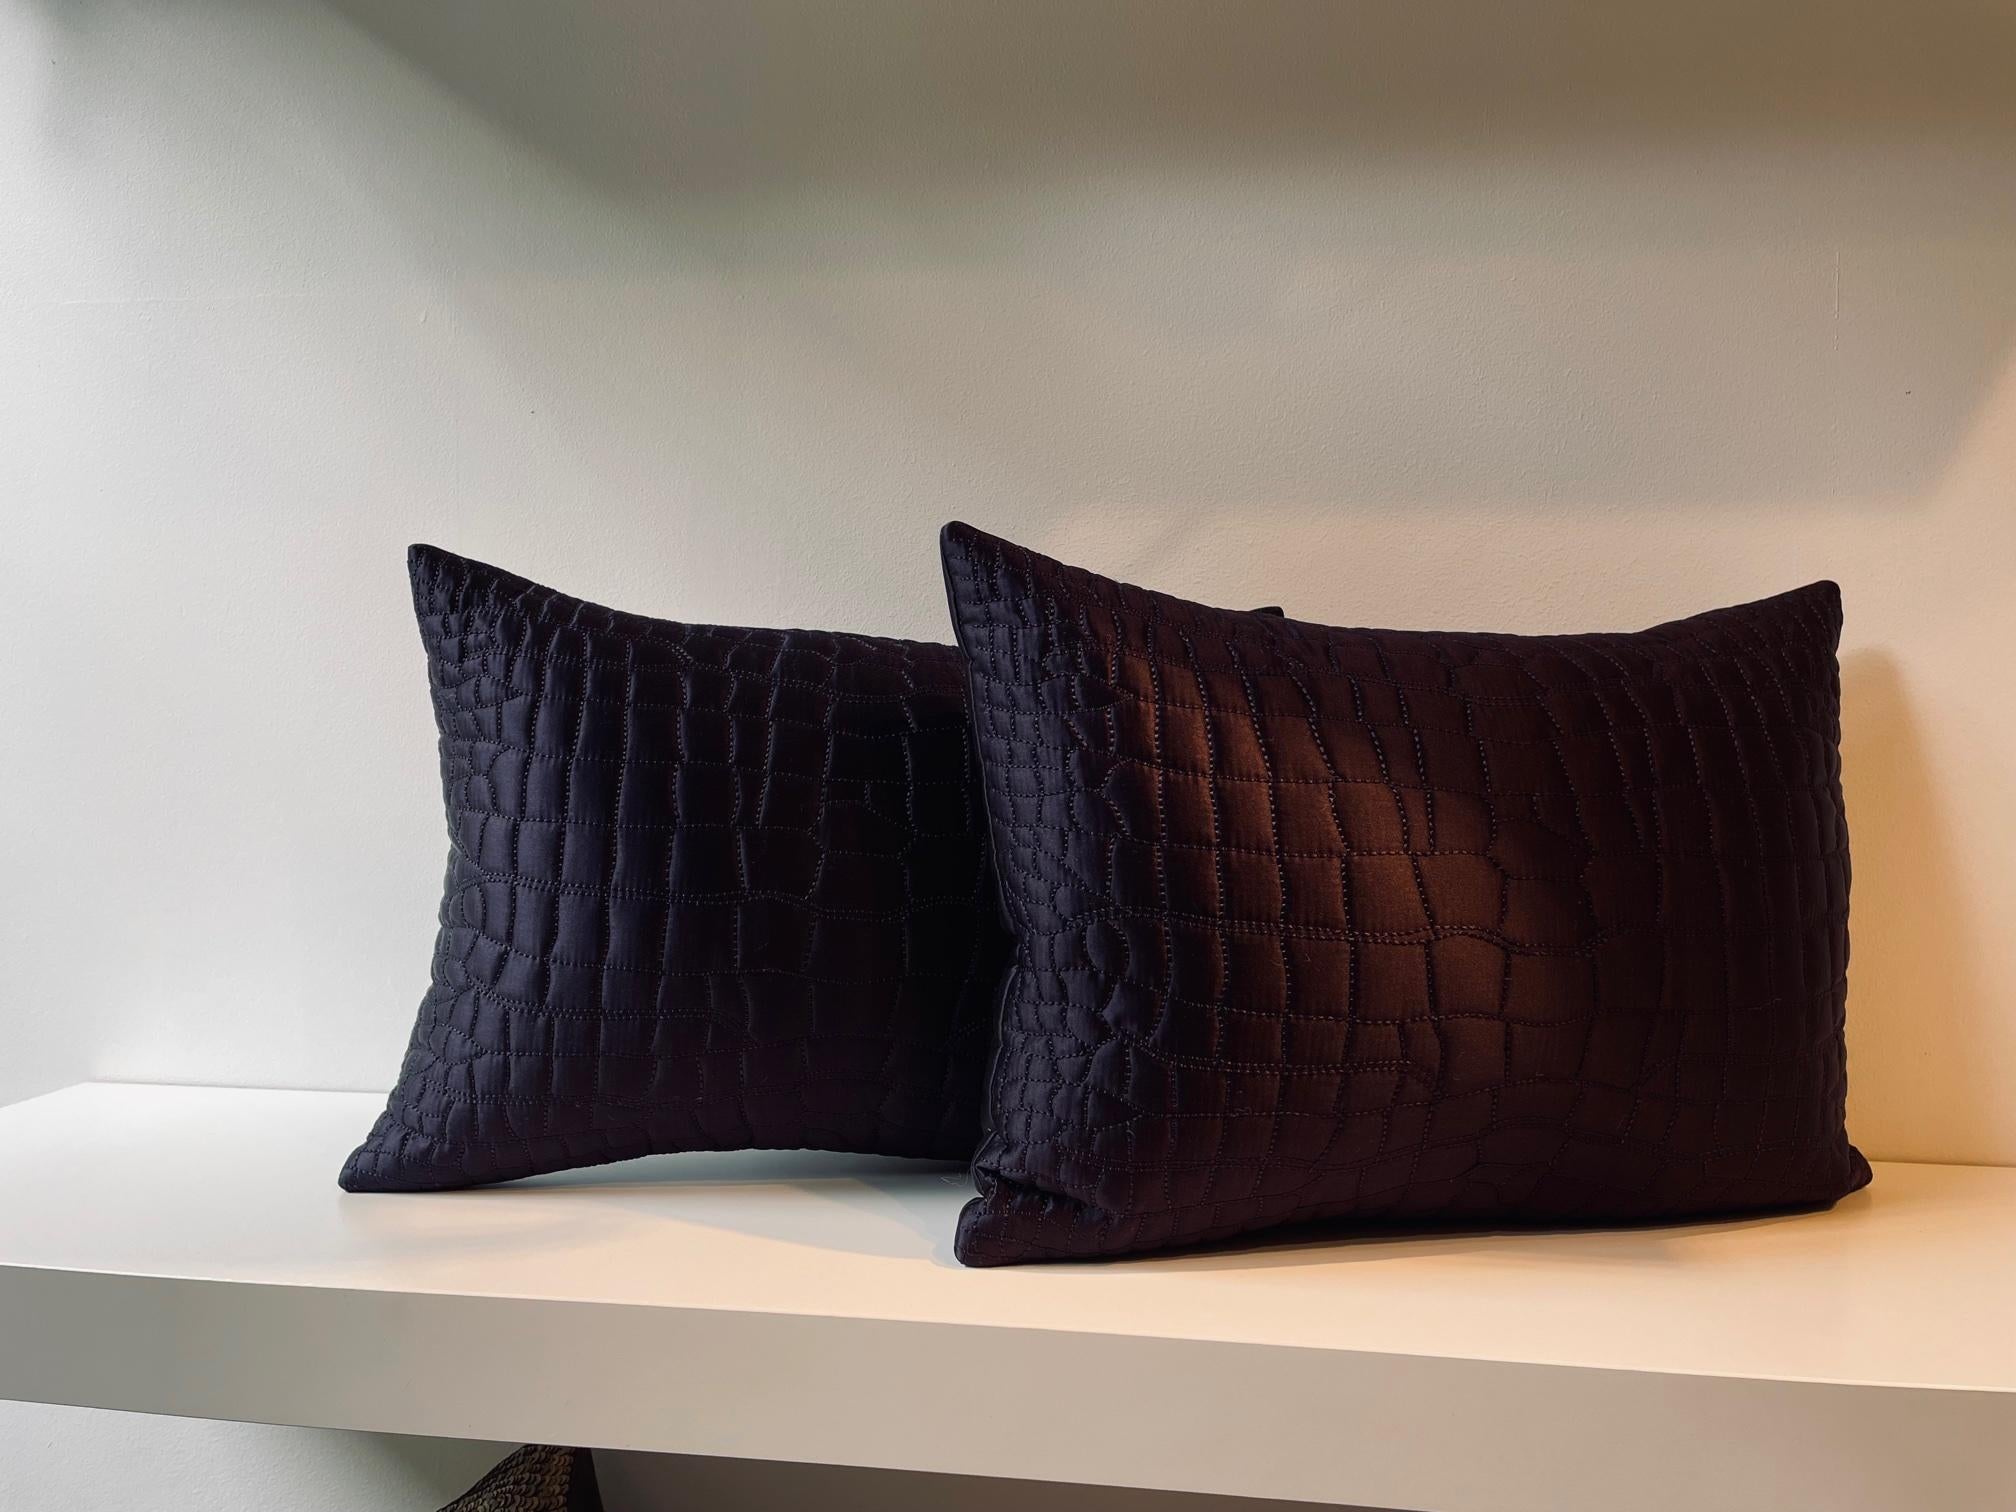 Pair of silk satin cushions, col. dark purple, hand quilted, Crocodile Skin Pattern at the front, plain silk satin at the back, cotton lining, concealed zip
Size 28 x 40cm
Feather inner pad.